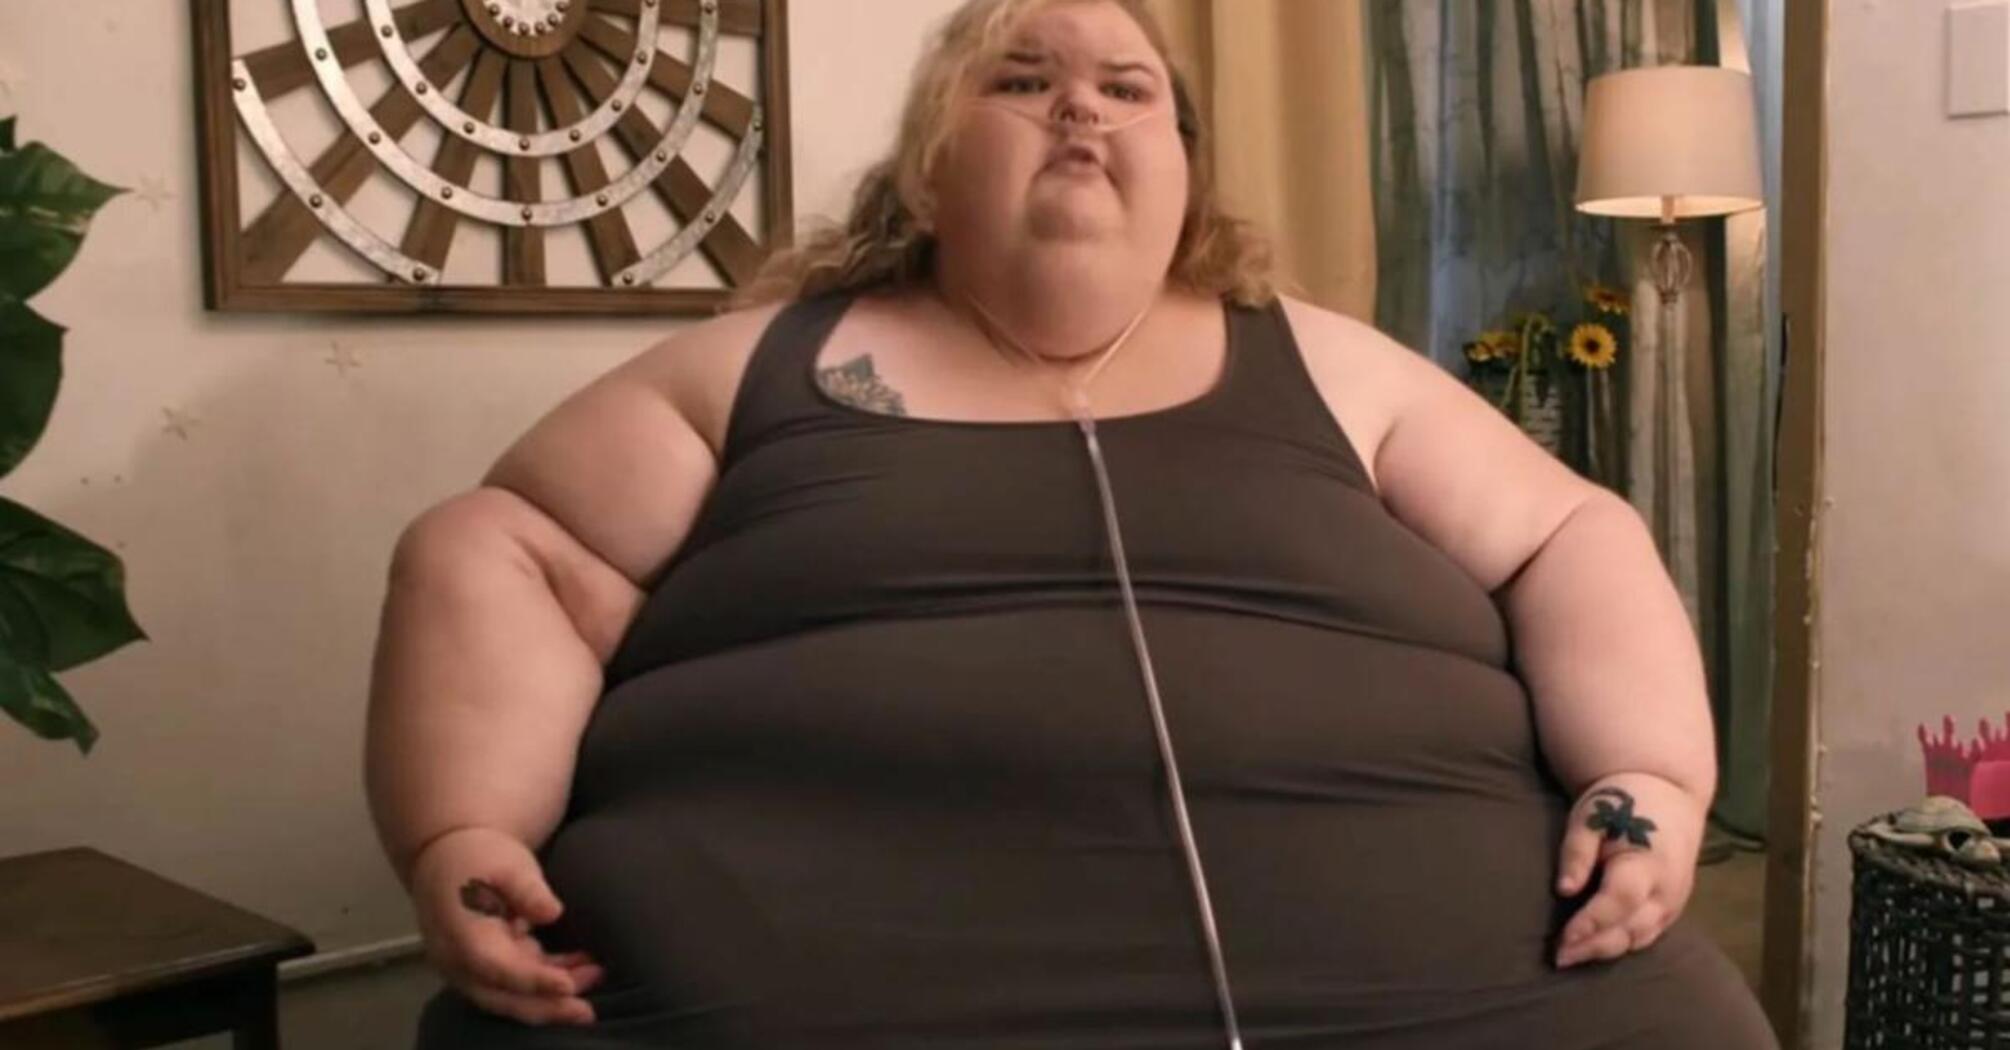 A 37-year-old woman shocked by losing 200 kilograms